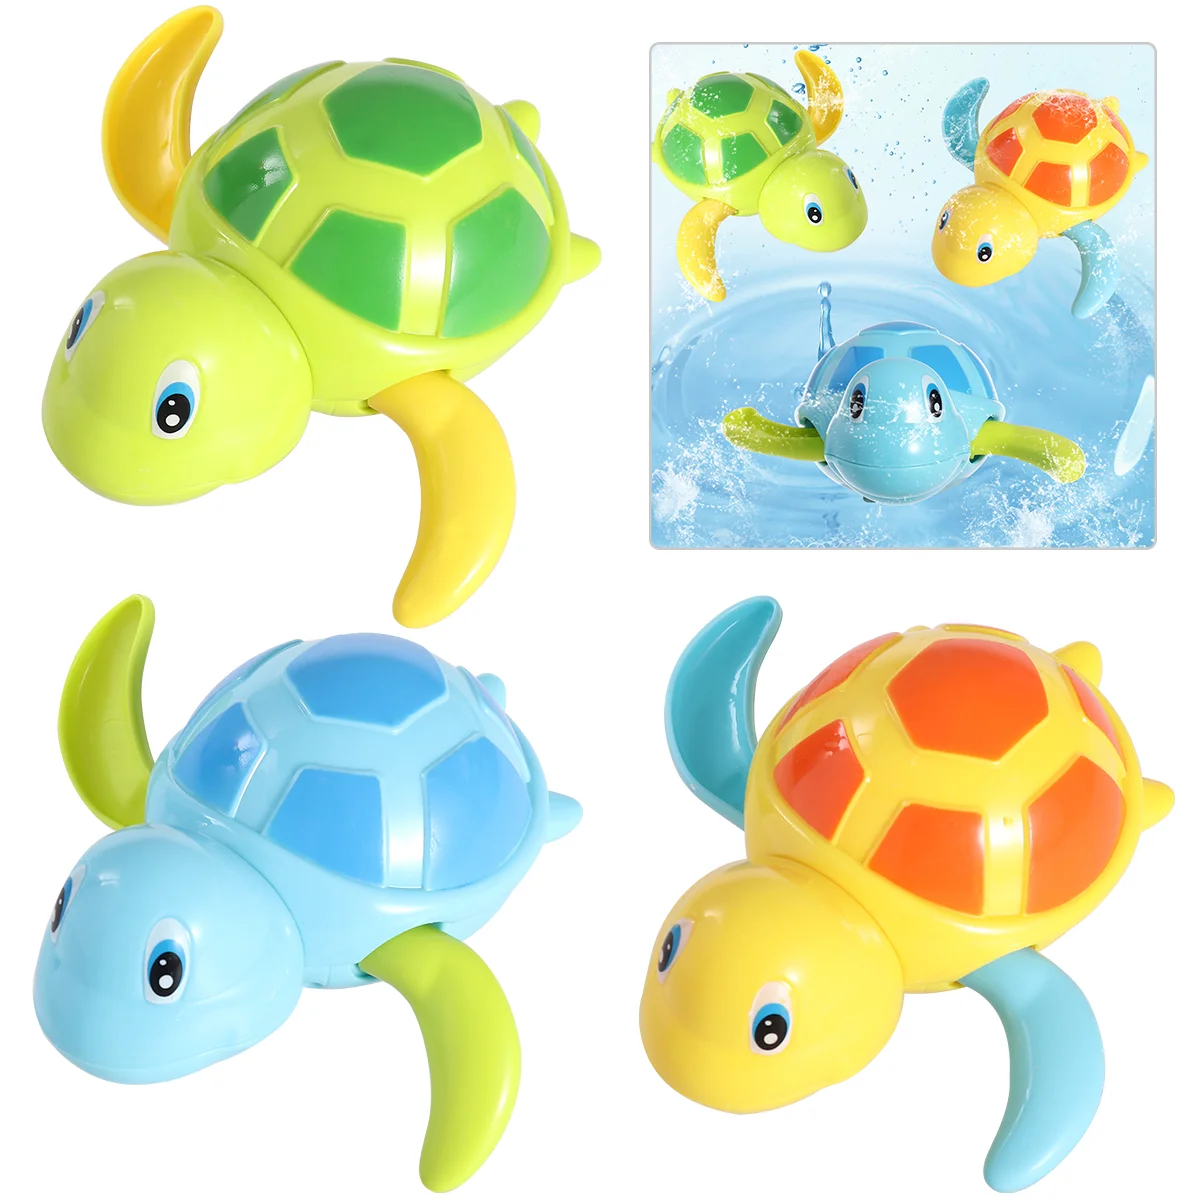 

3Pcs Bath Toys Wind Turtle Toys Floating Water Bathtub toysPlastic Swinmming Turtle Playing Water Toys for Toddlers Infant